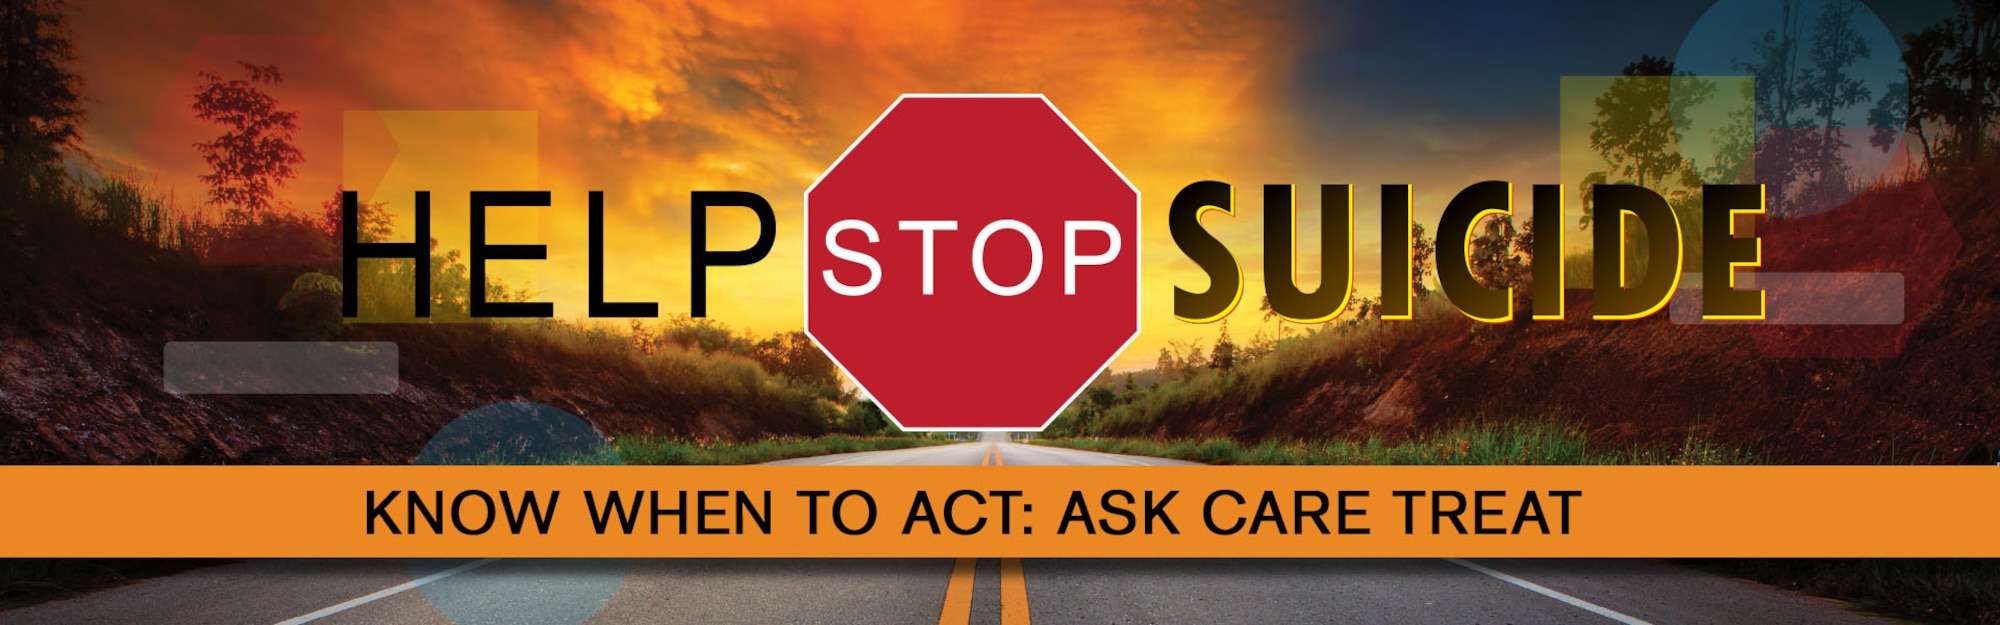 Help Stop Suicide Know When To Act: Ask Care Treat written over a road.